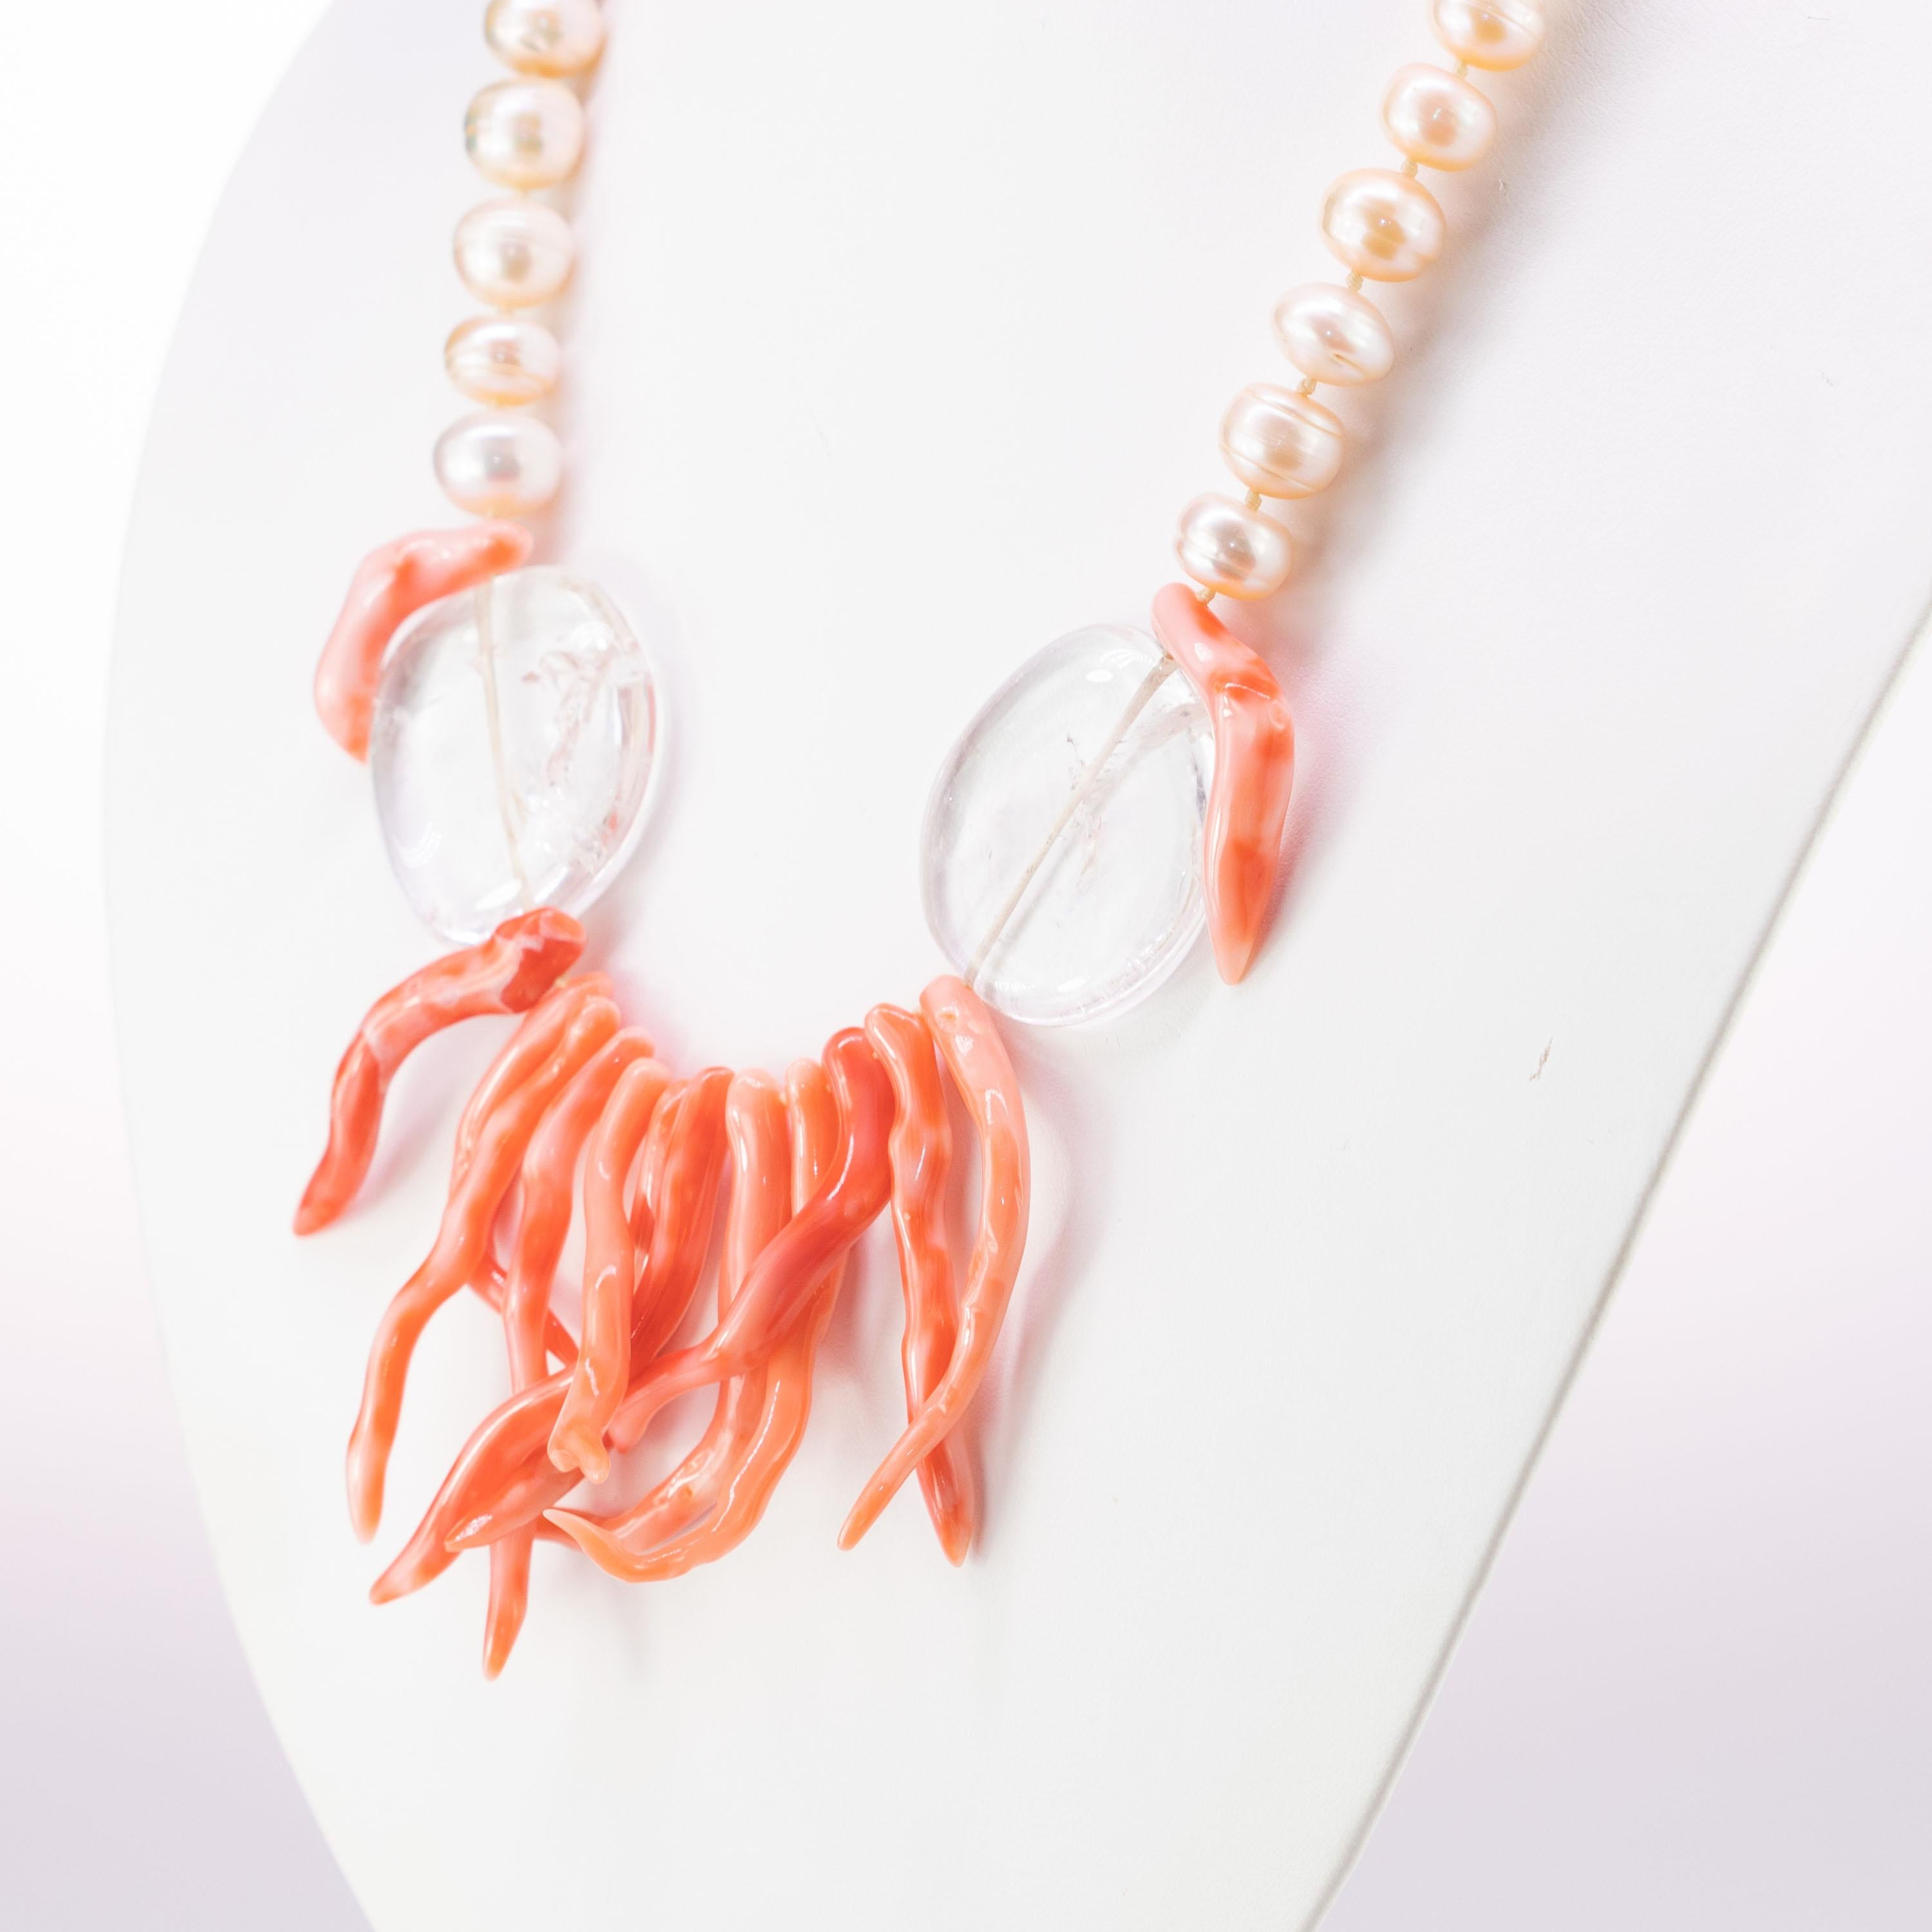 Immerse yourself in the beauty of this uniquely designed necklace with natural pink coral, freshwater pearls and crystal rocks.
 
This design is inspired by the corals of the Australian Great Barrier Reef. A subtle and harmonious jewel. The warm